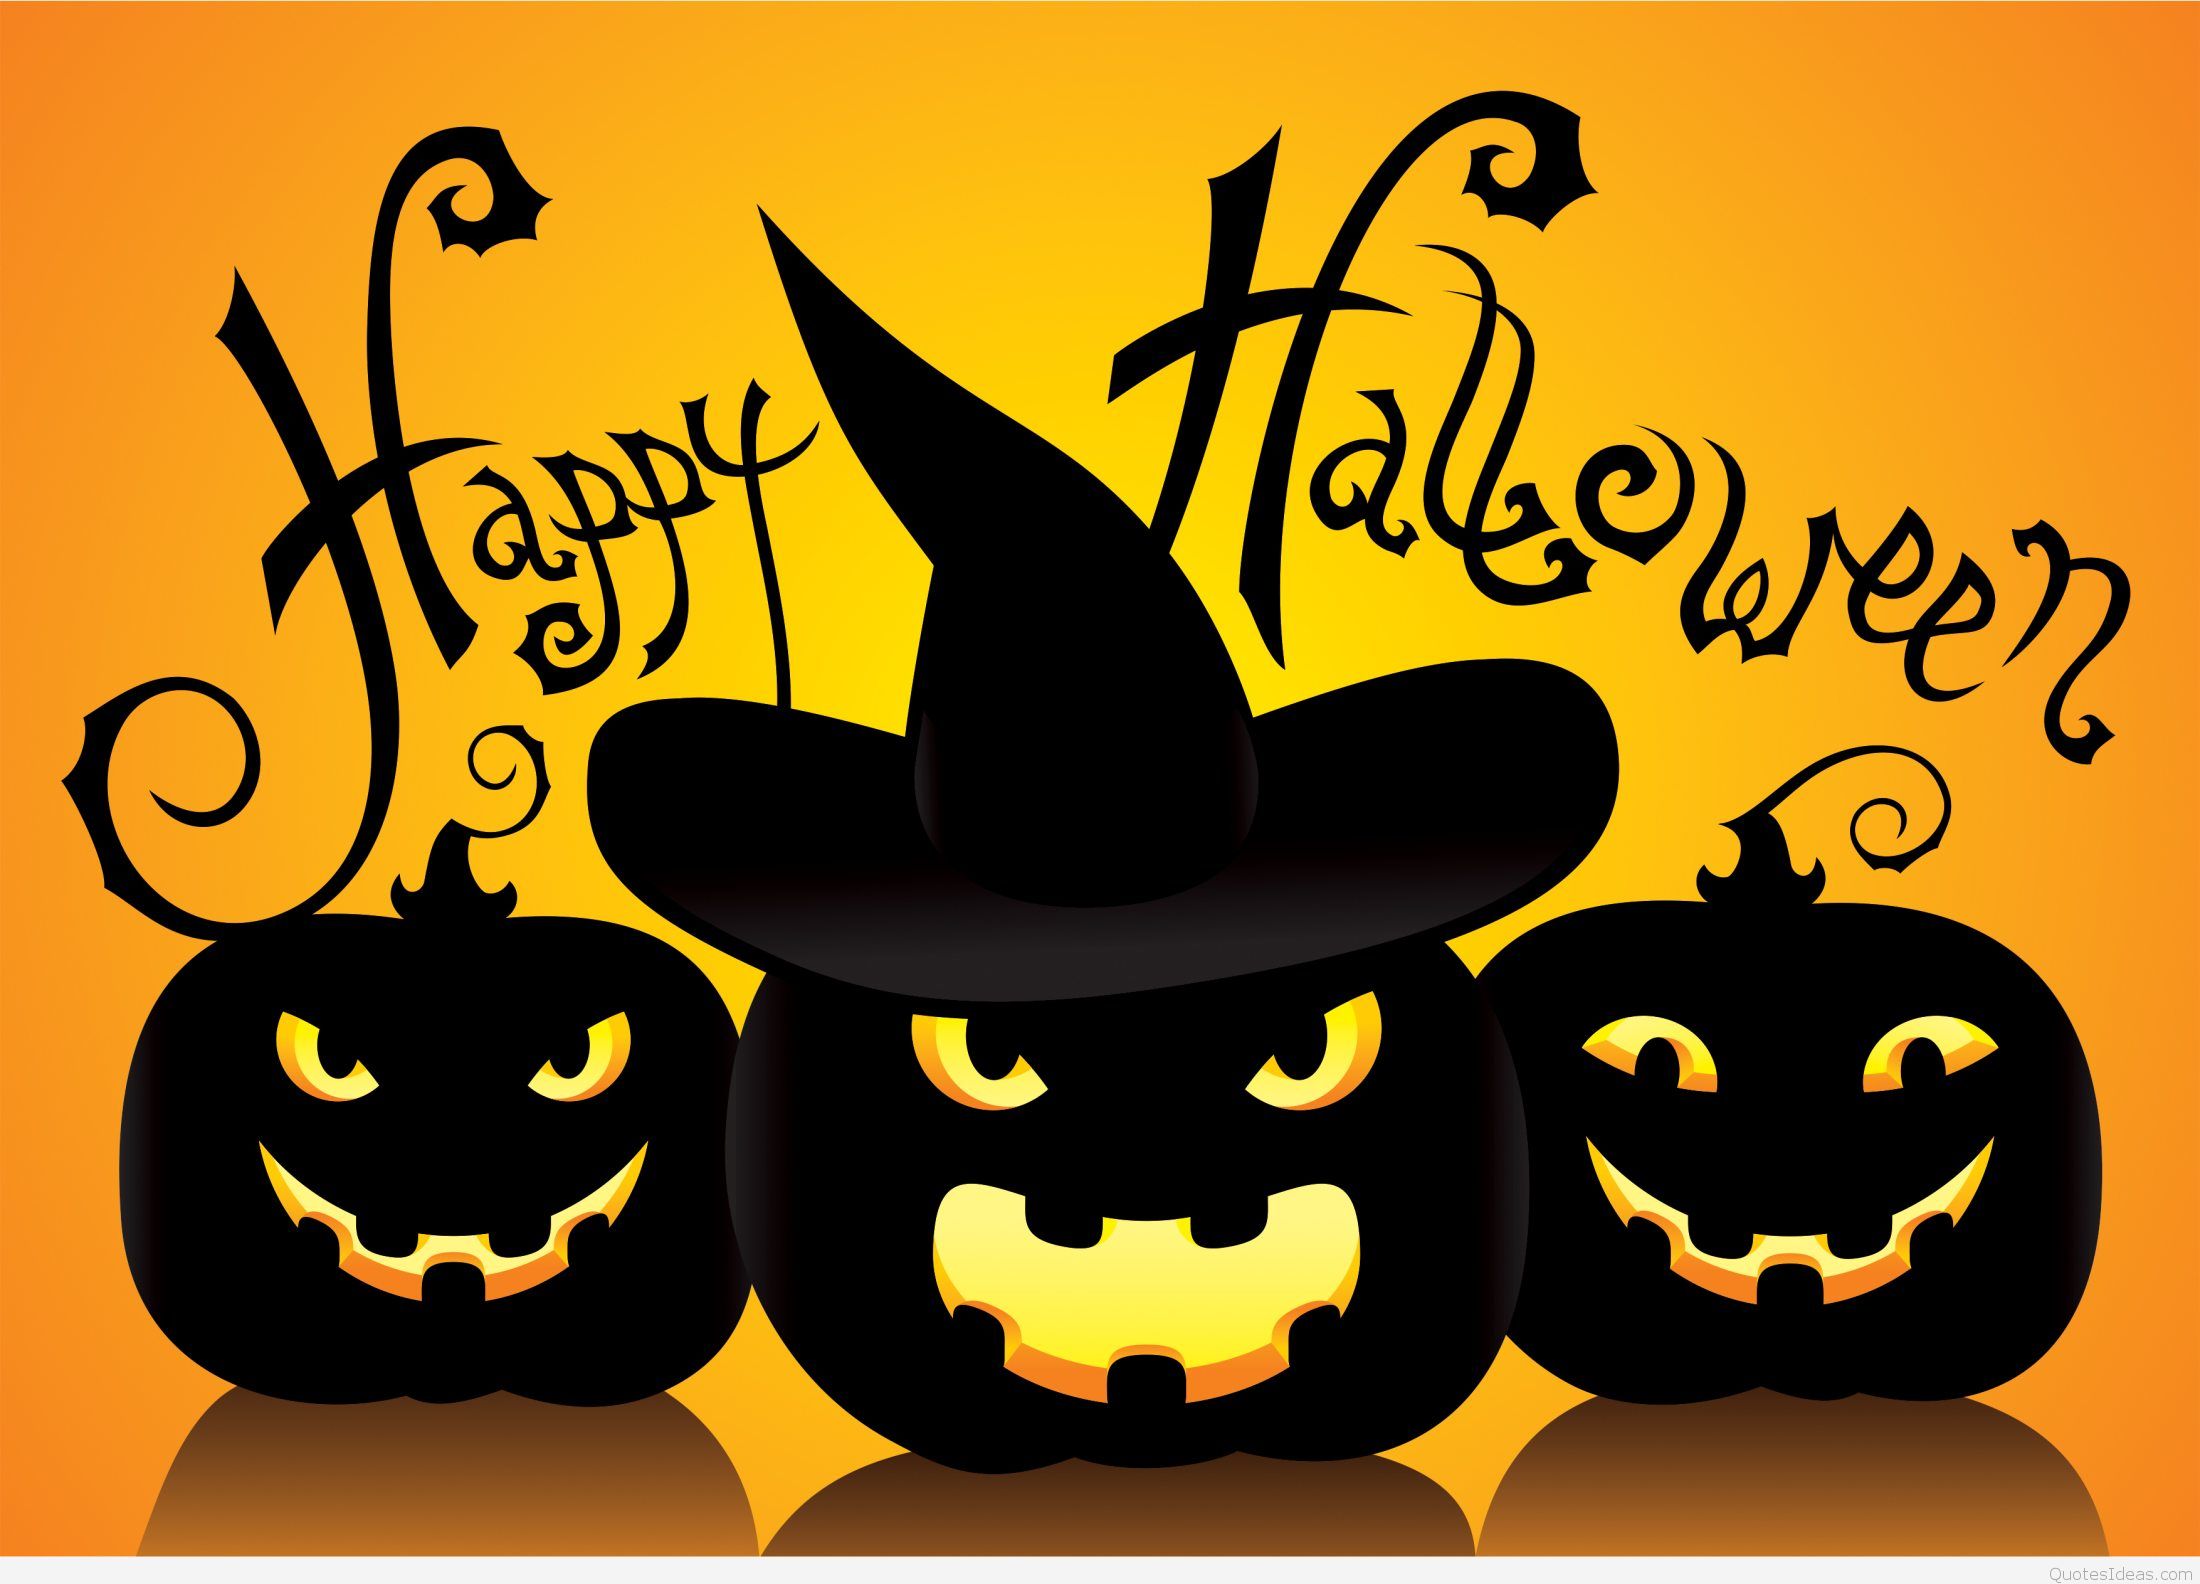 halloween wallpaper,trick or treat,witch hat,black cat,calabaza,font